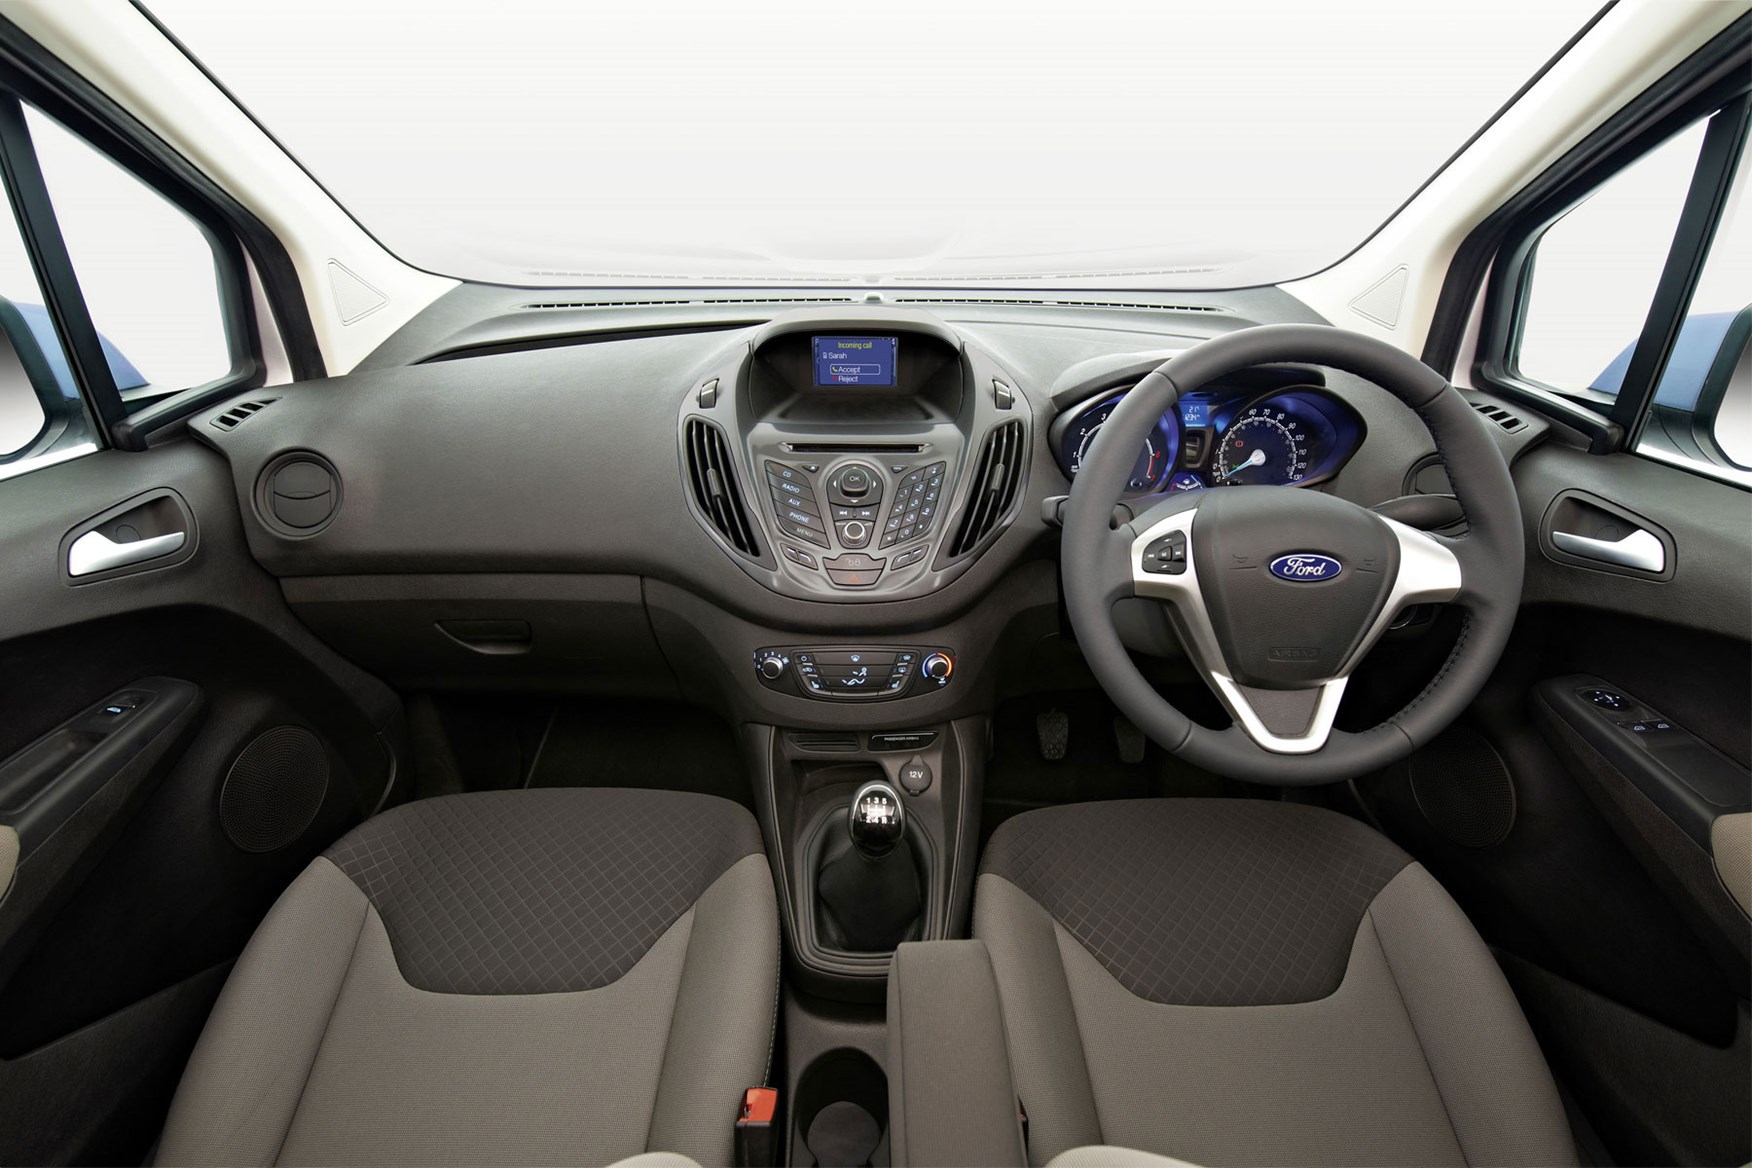 Ford Transit Courier review - cab interior pre facelift